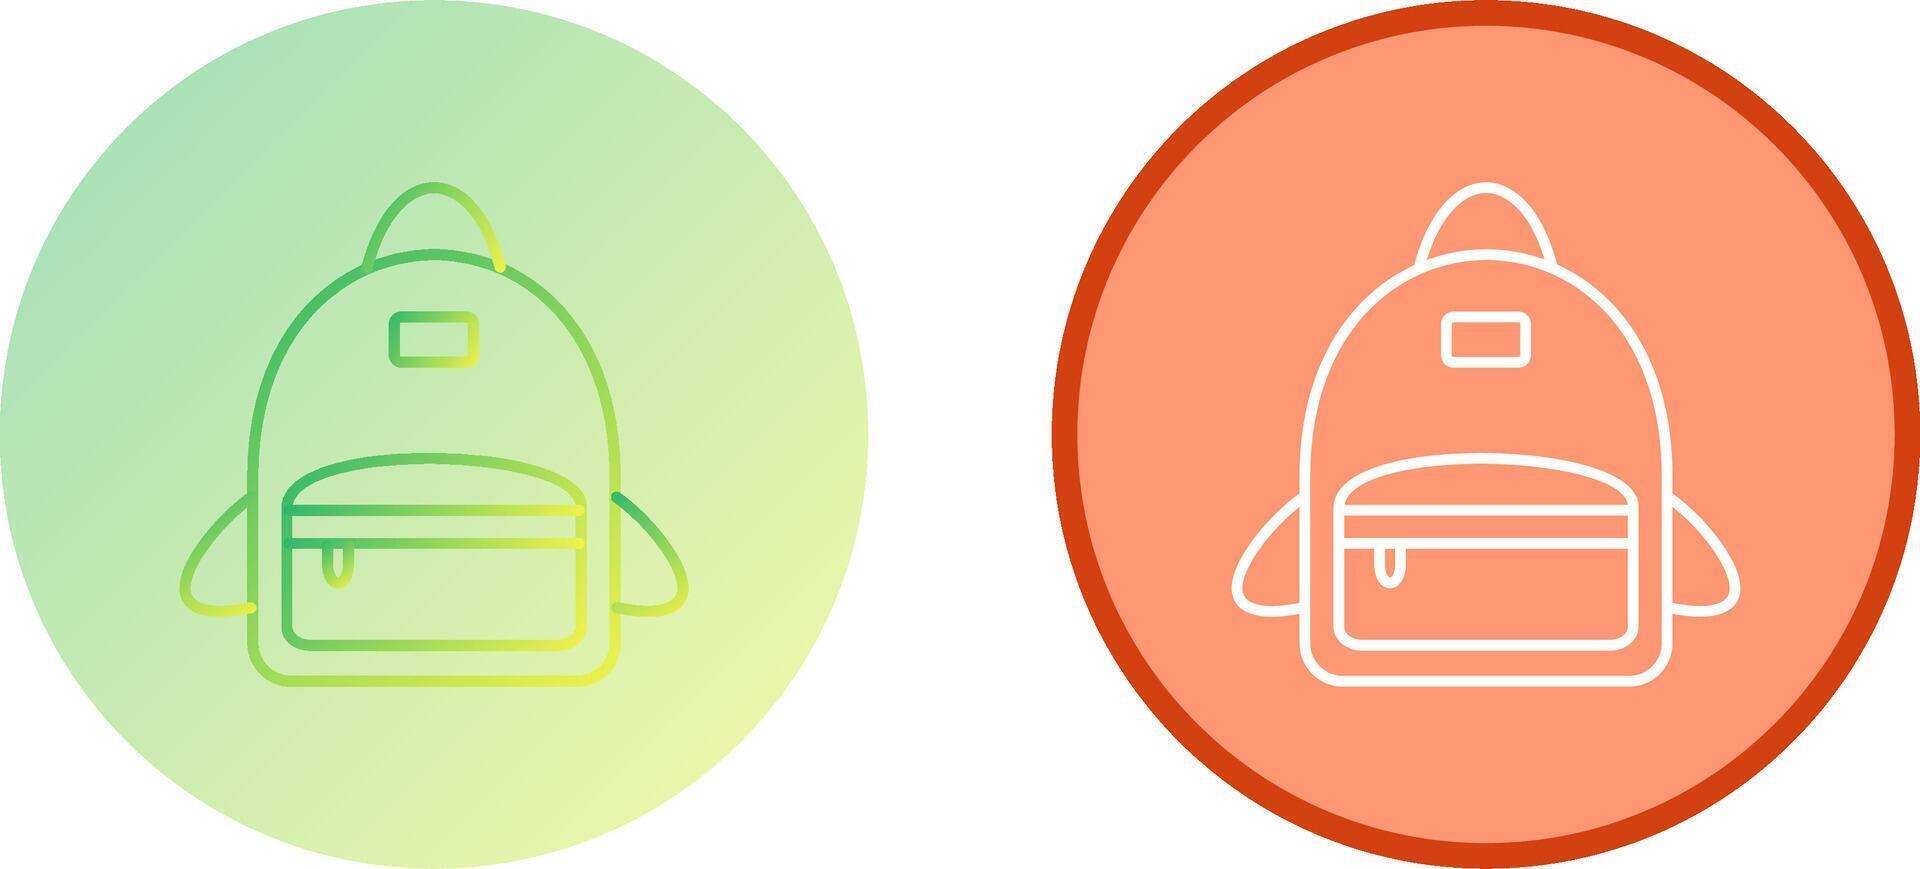 Bag Pack Icon Design vector